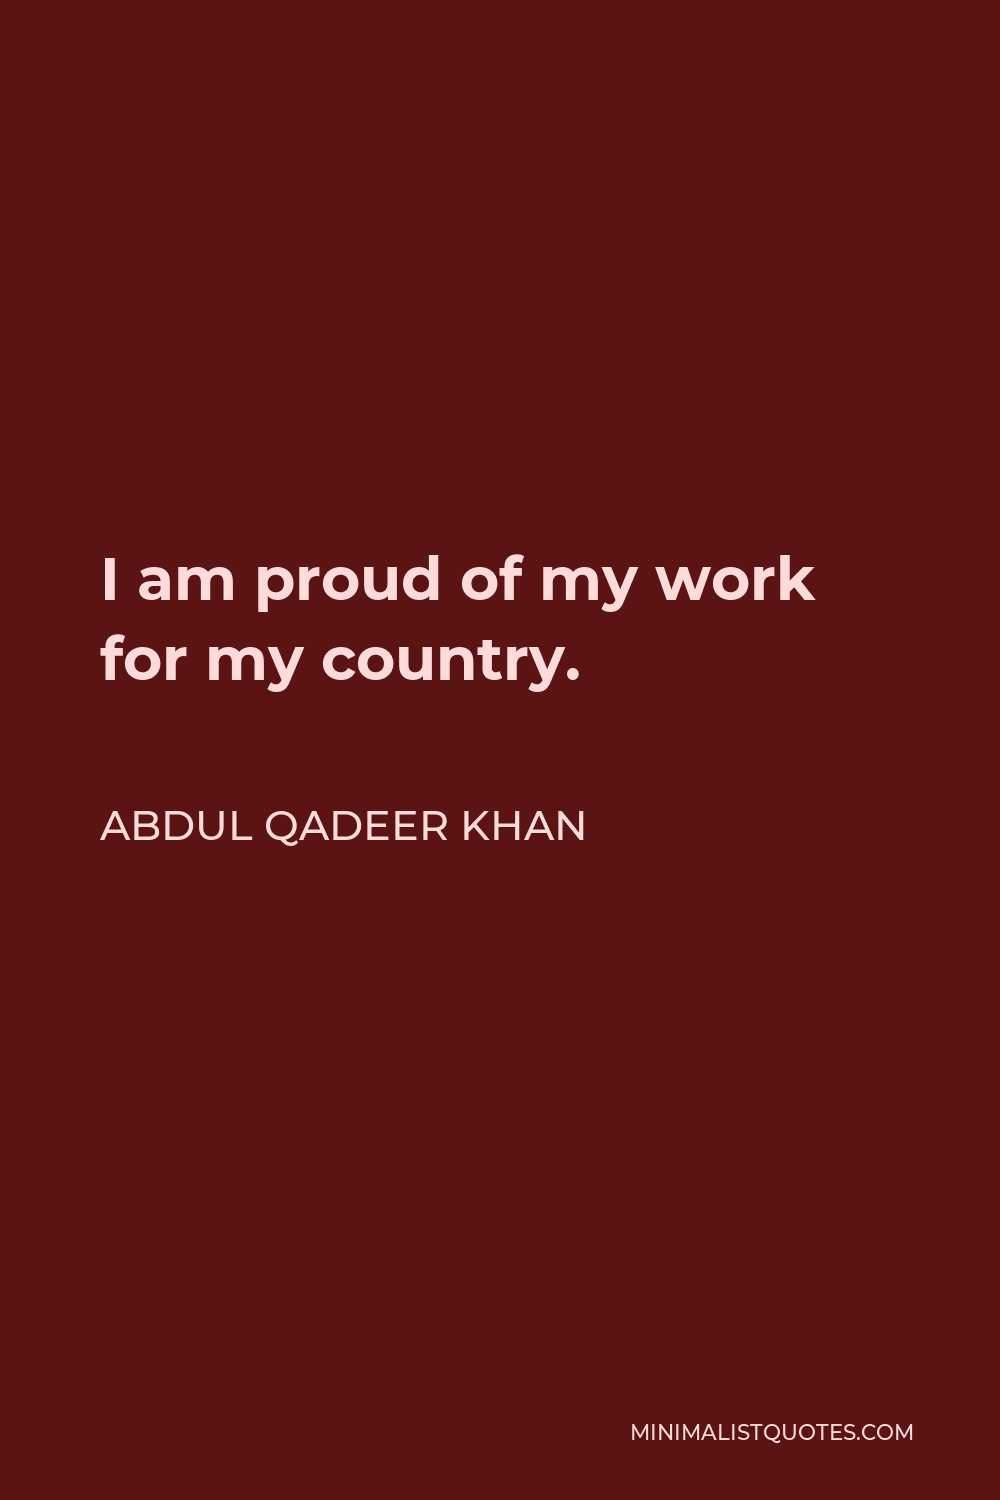 Abdul Qadeer Khan Quote - I am proud of my work for my country.